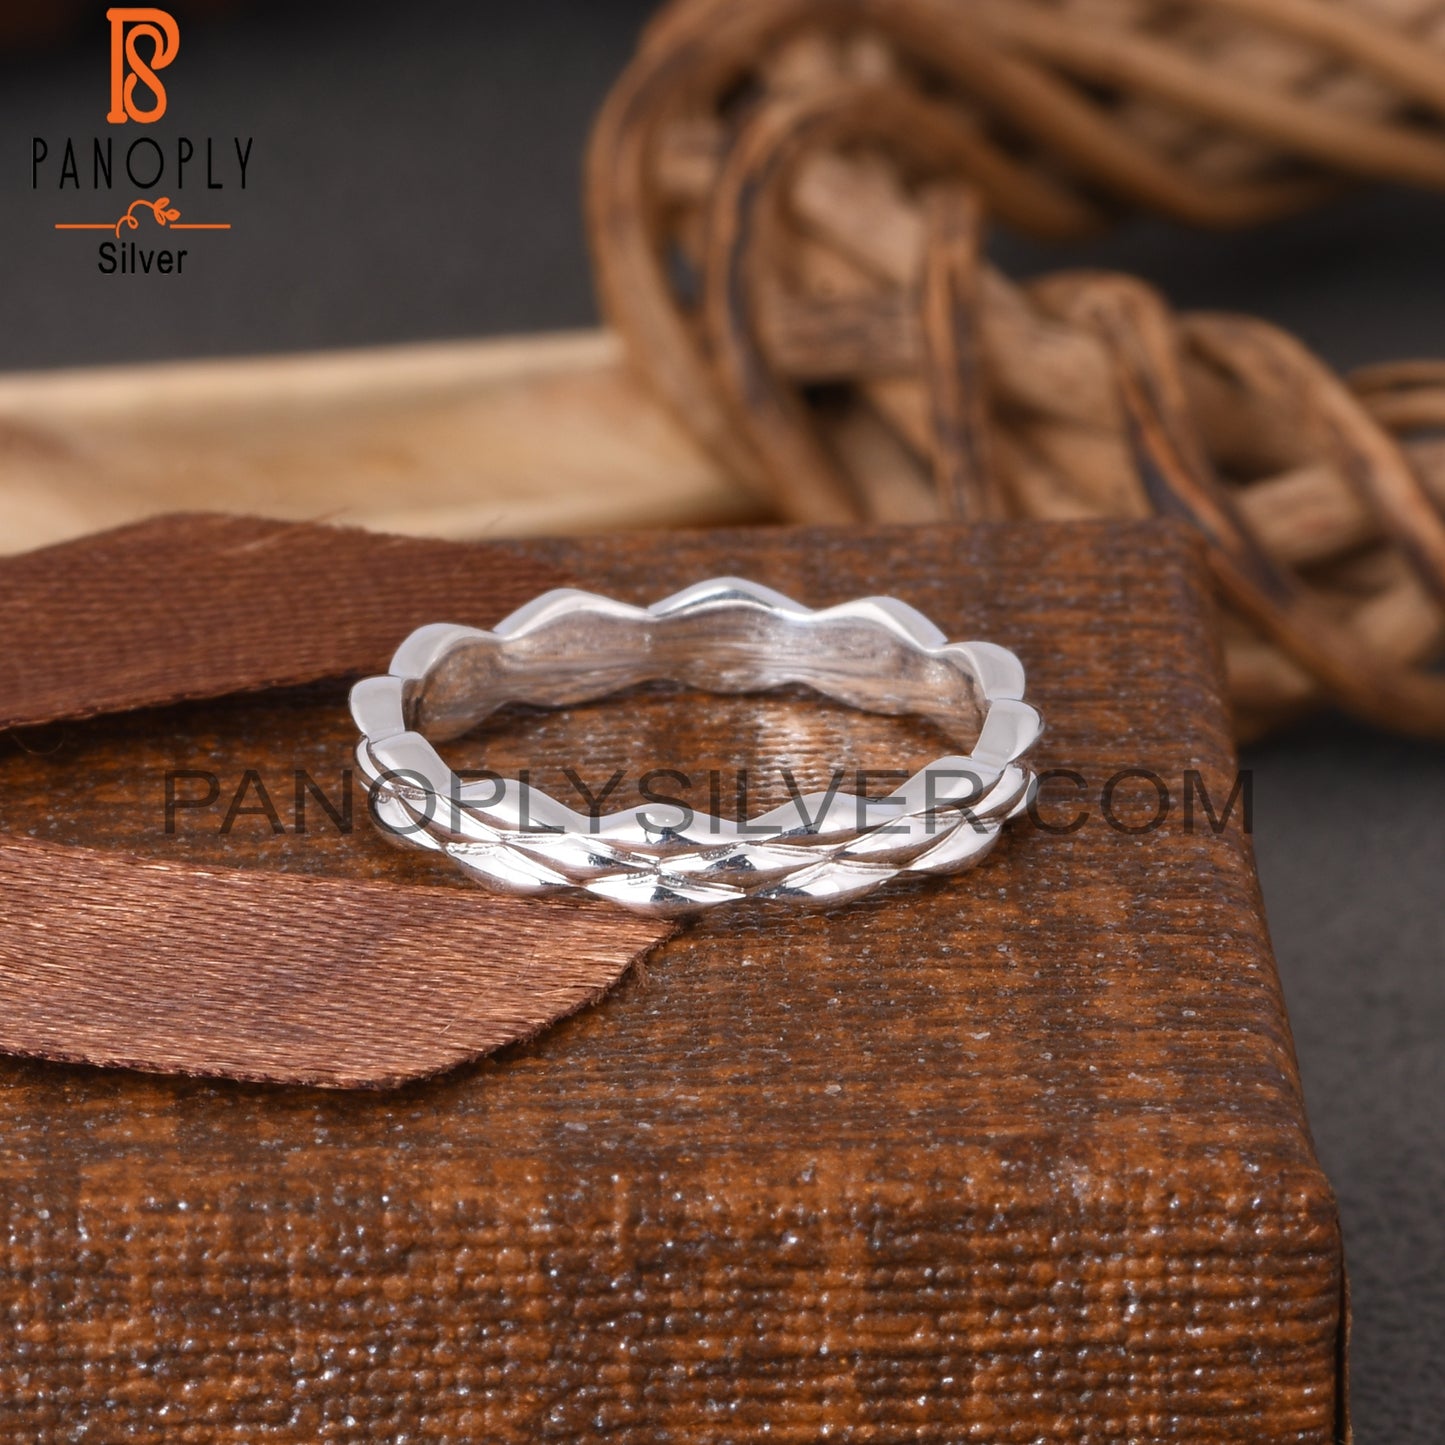 Handmade 925 Sterling Silver Ring Beautiful Gift For Sister